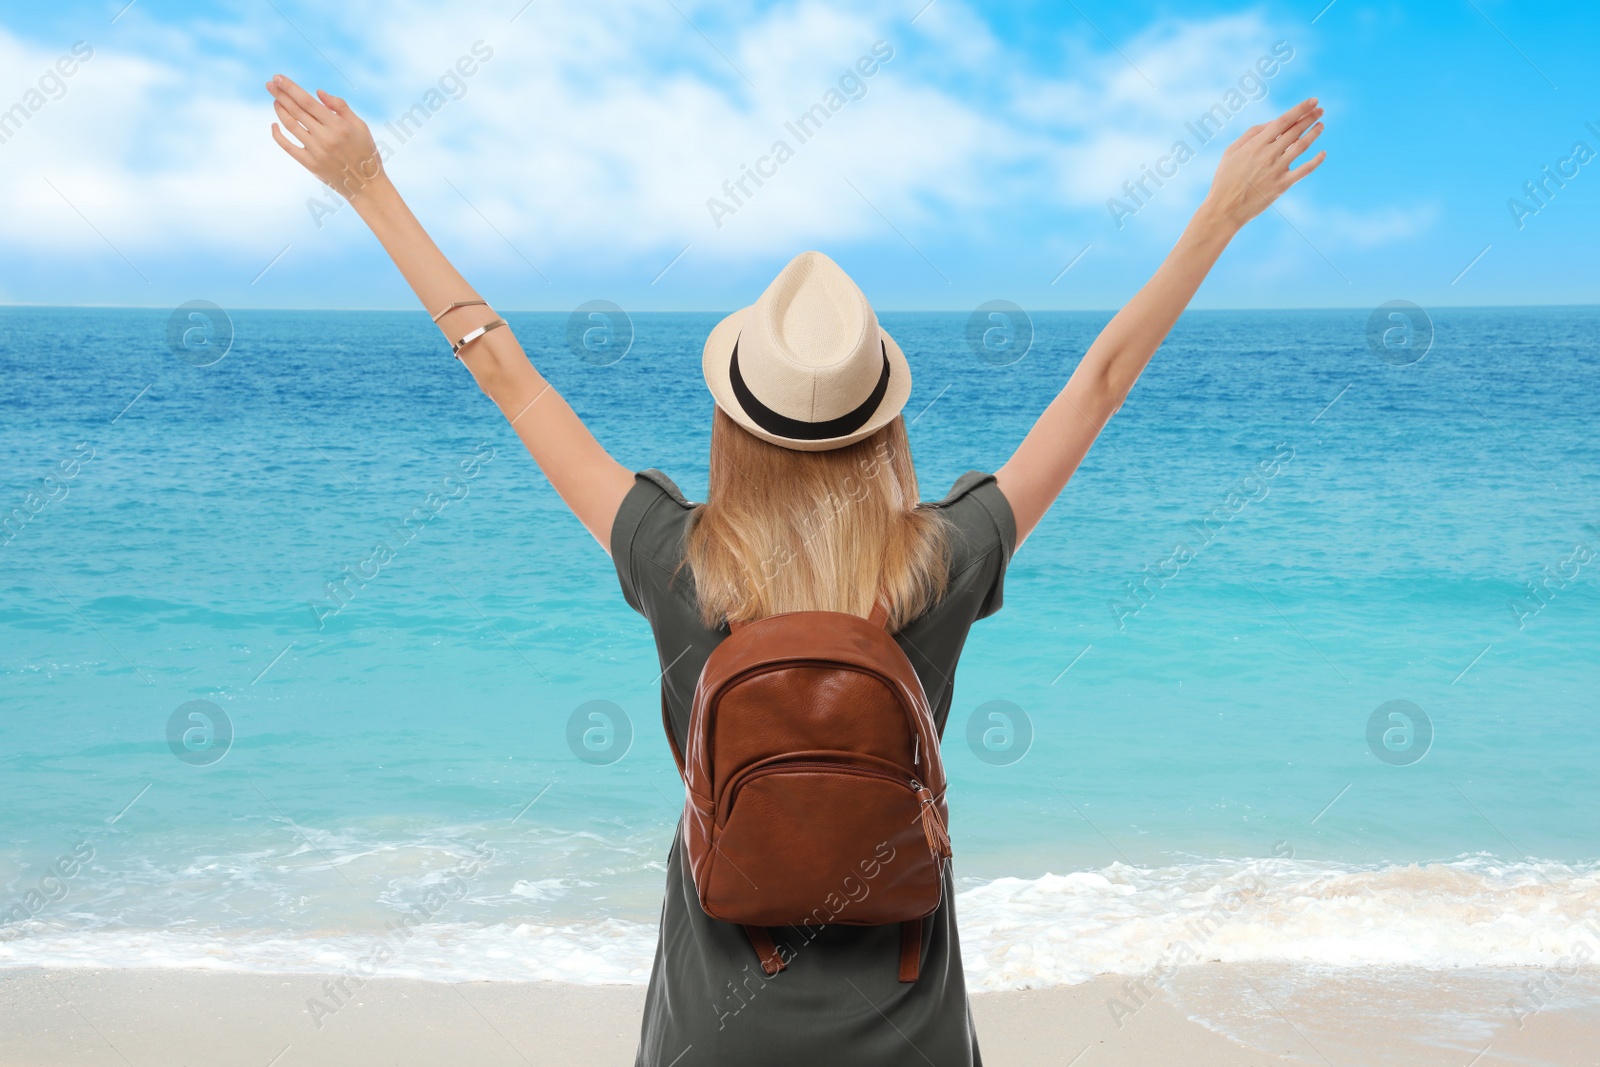 Image of Traveler with backpack on seashore during summer vacation trip, back view